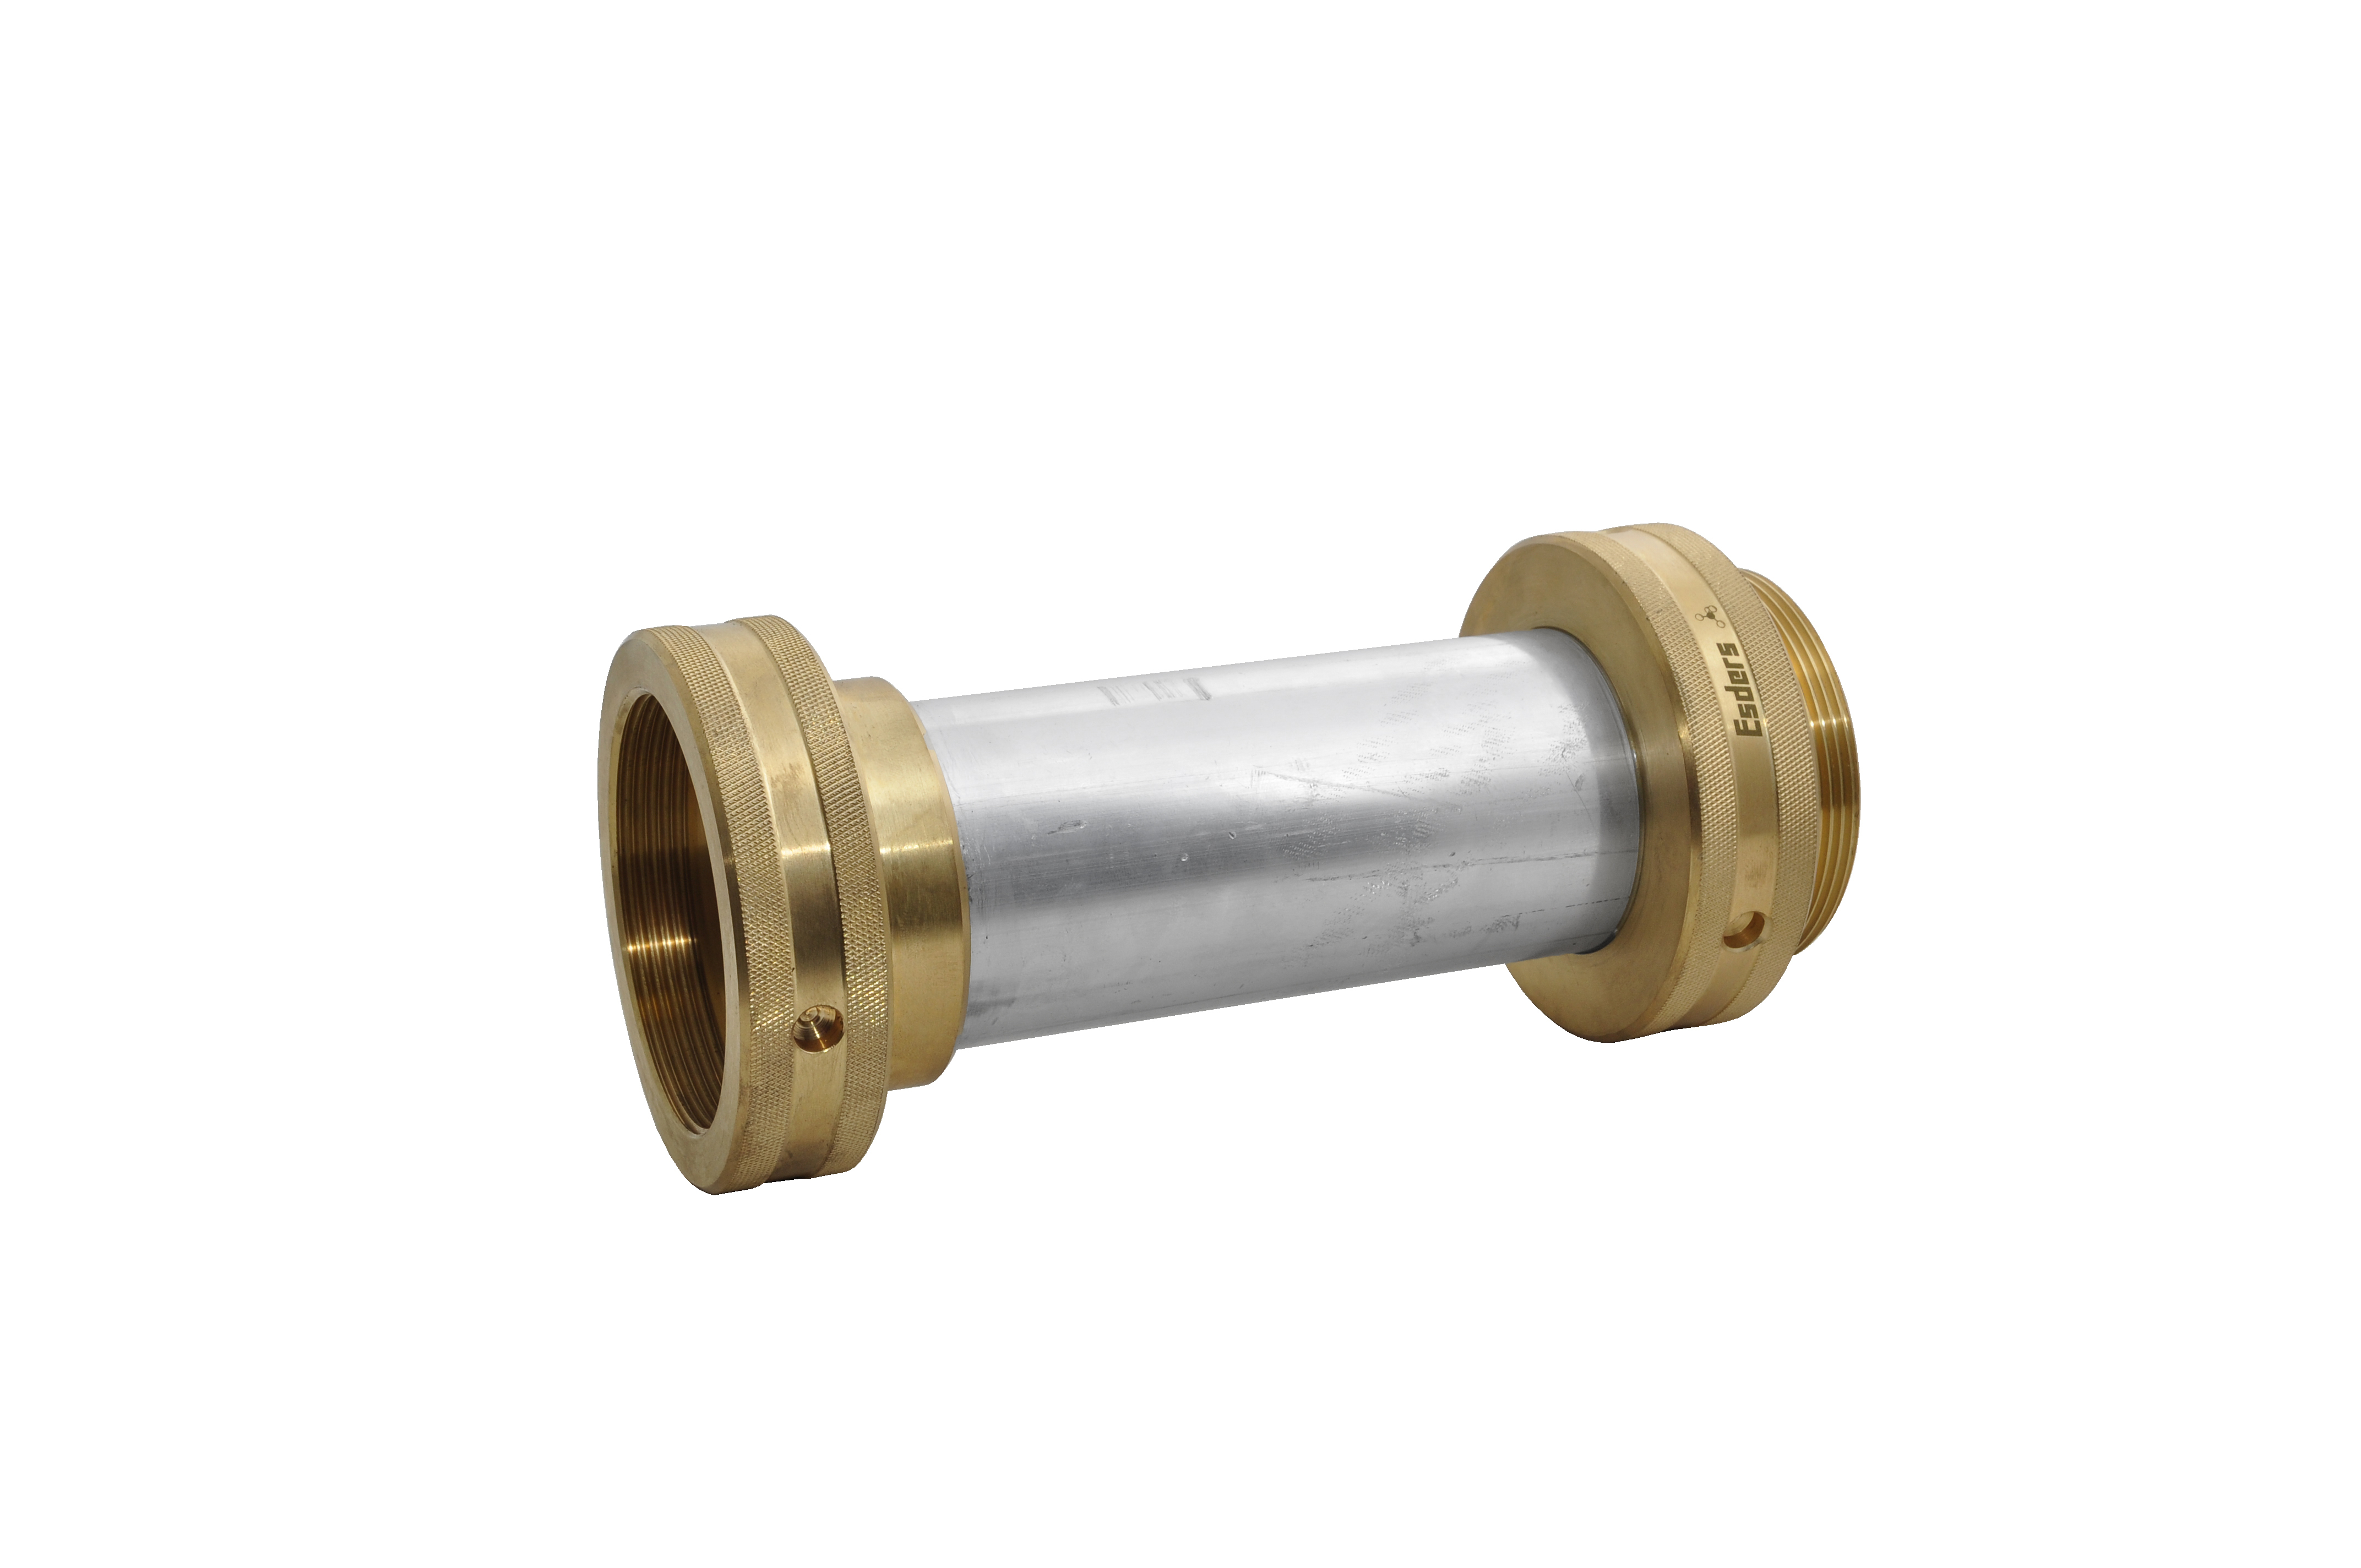 Extension 2 ½" inner thread/outer thread 220 mm